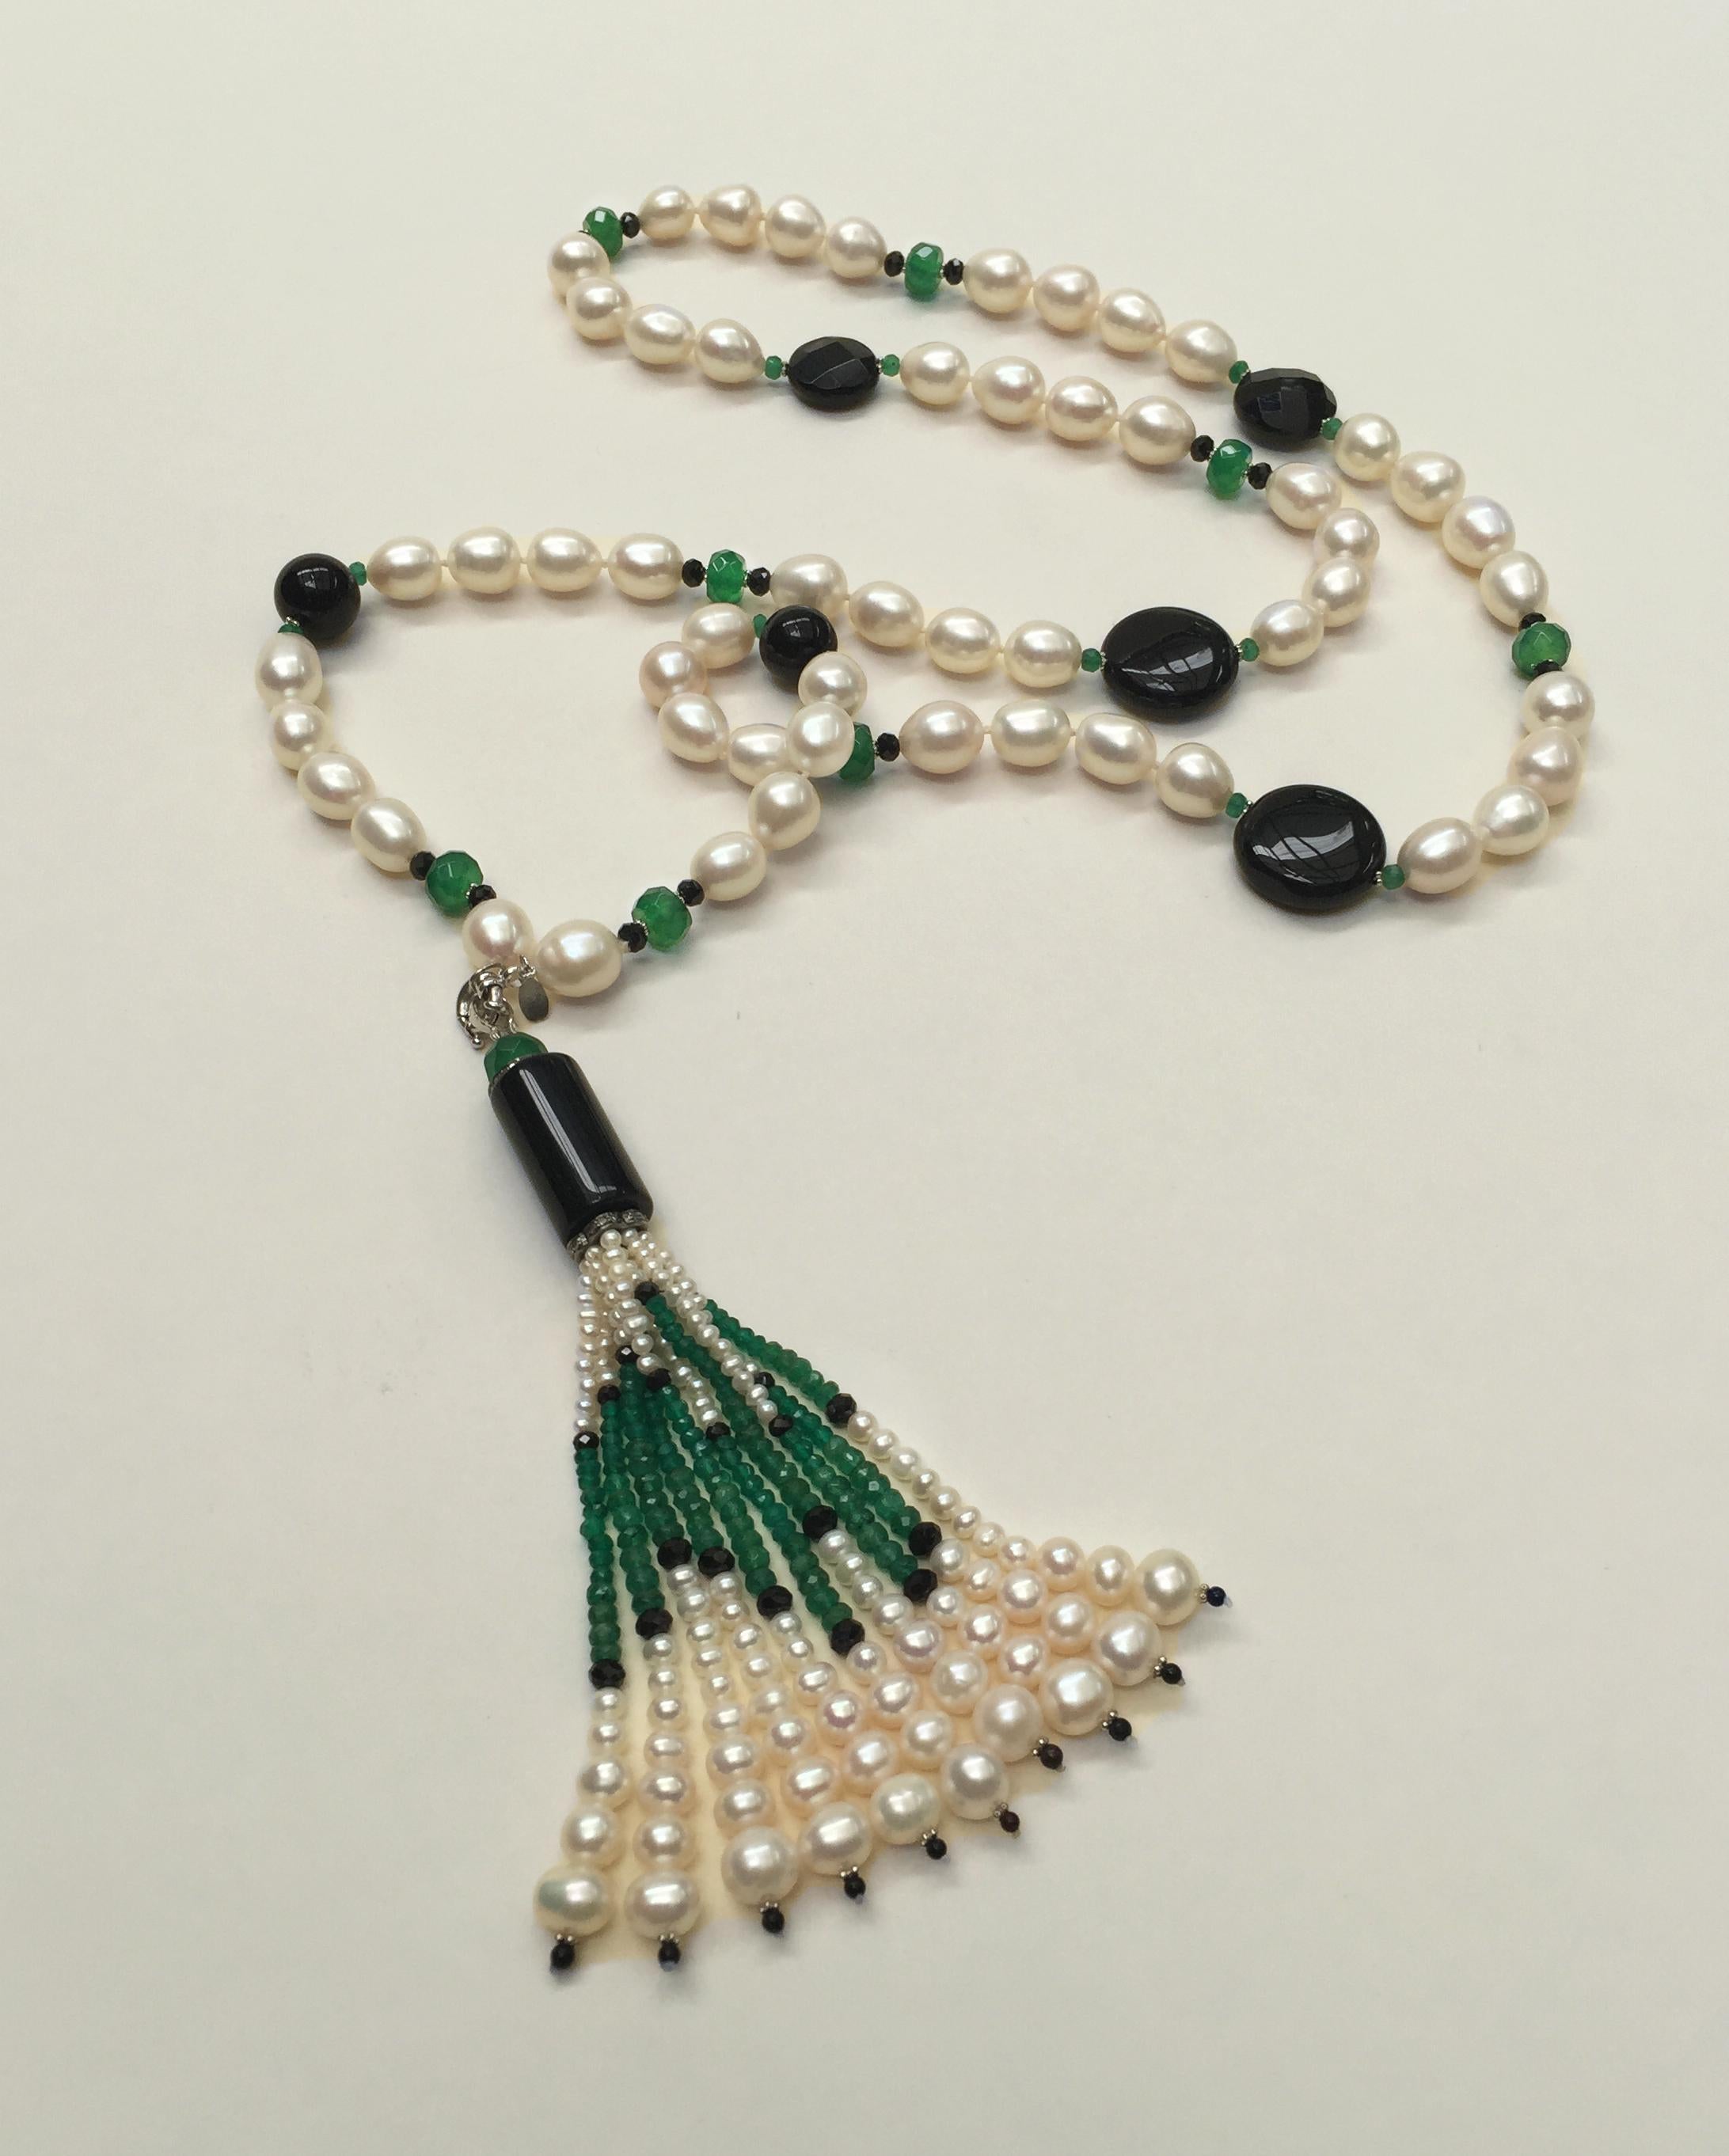 Black Onyx, Jade and Pearl Necklace with Tassel and 14 Karat White Gold Clasp 2